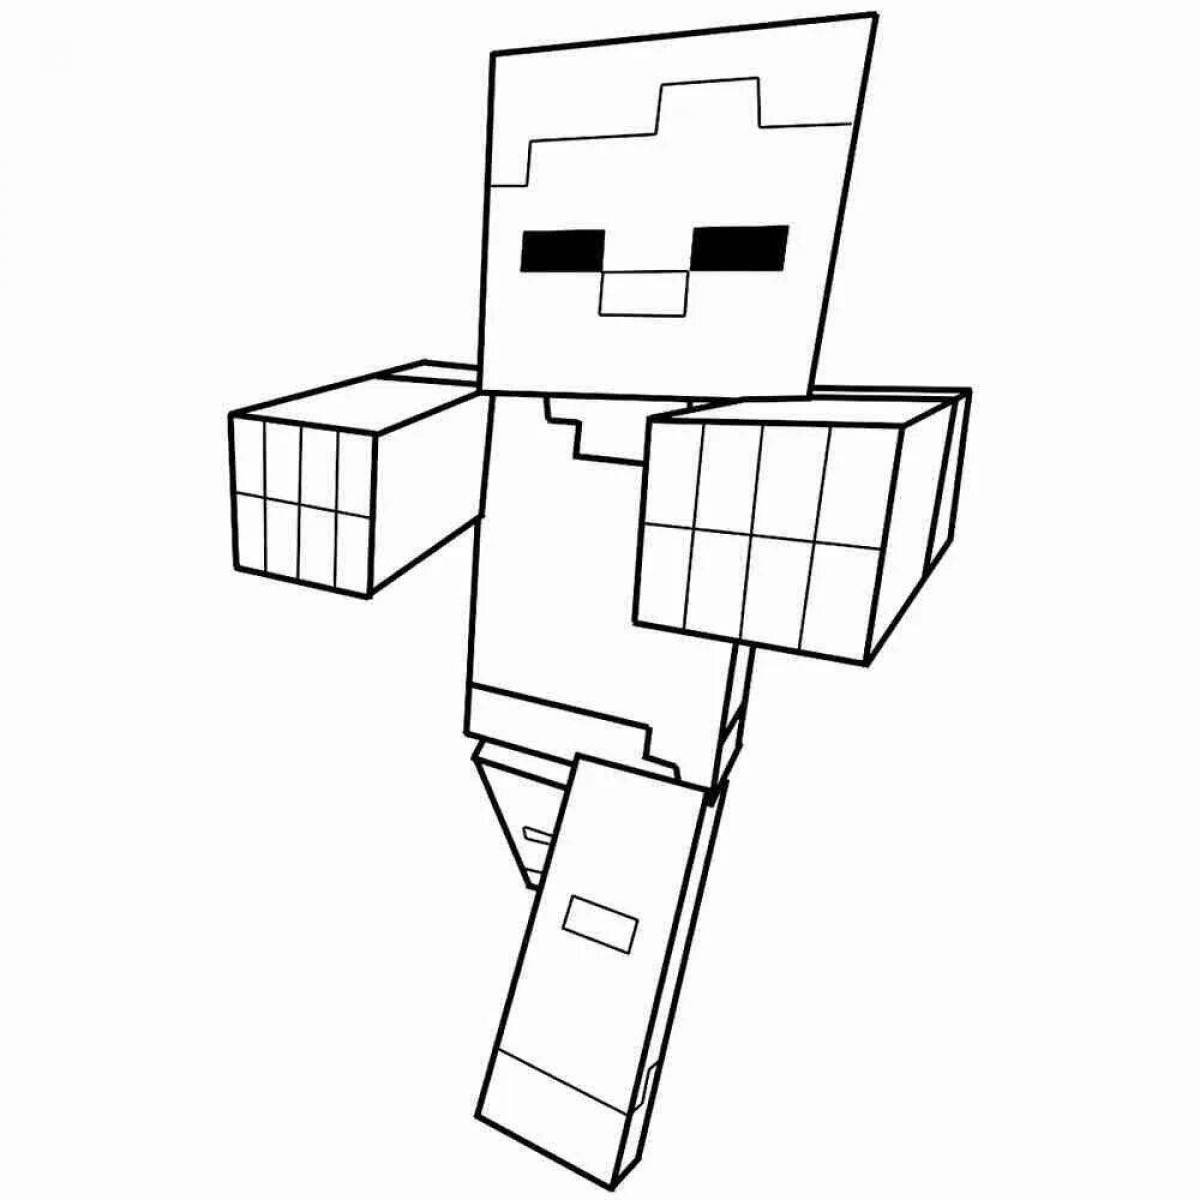 Exquisite minecraft pixel coloring page